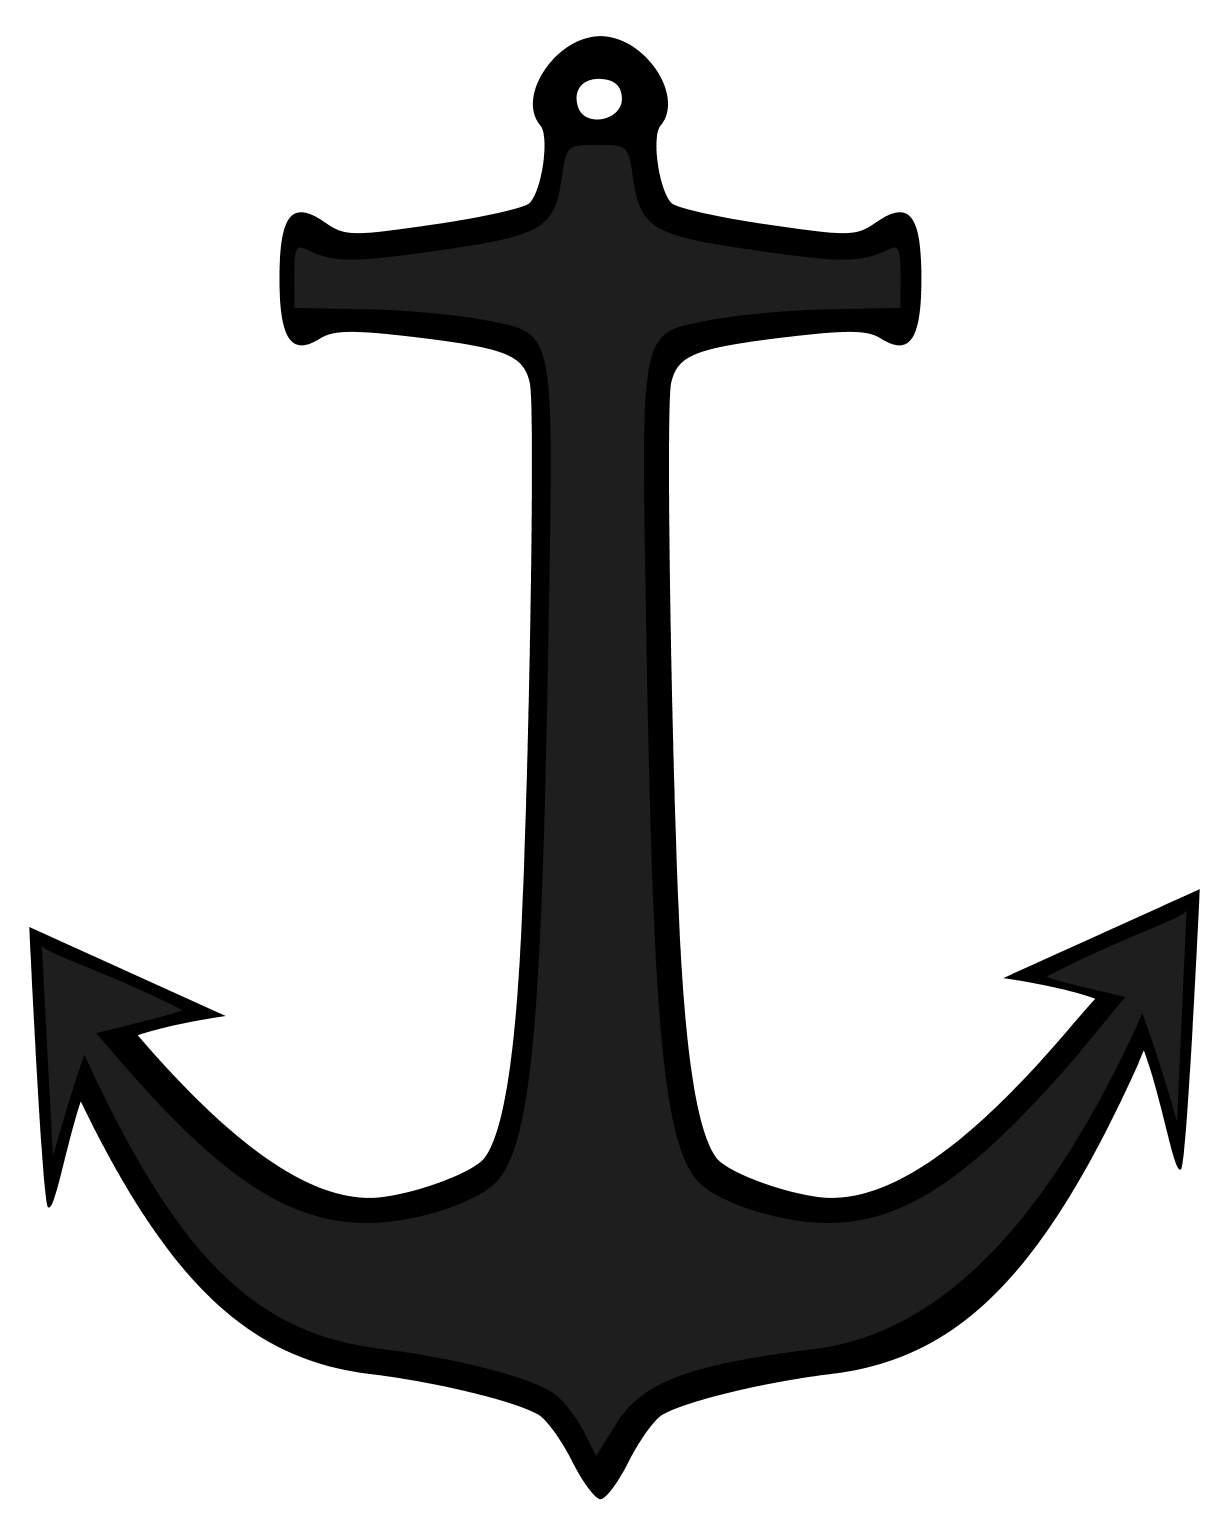 Anchor png images free. Wheel clipart yacht